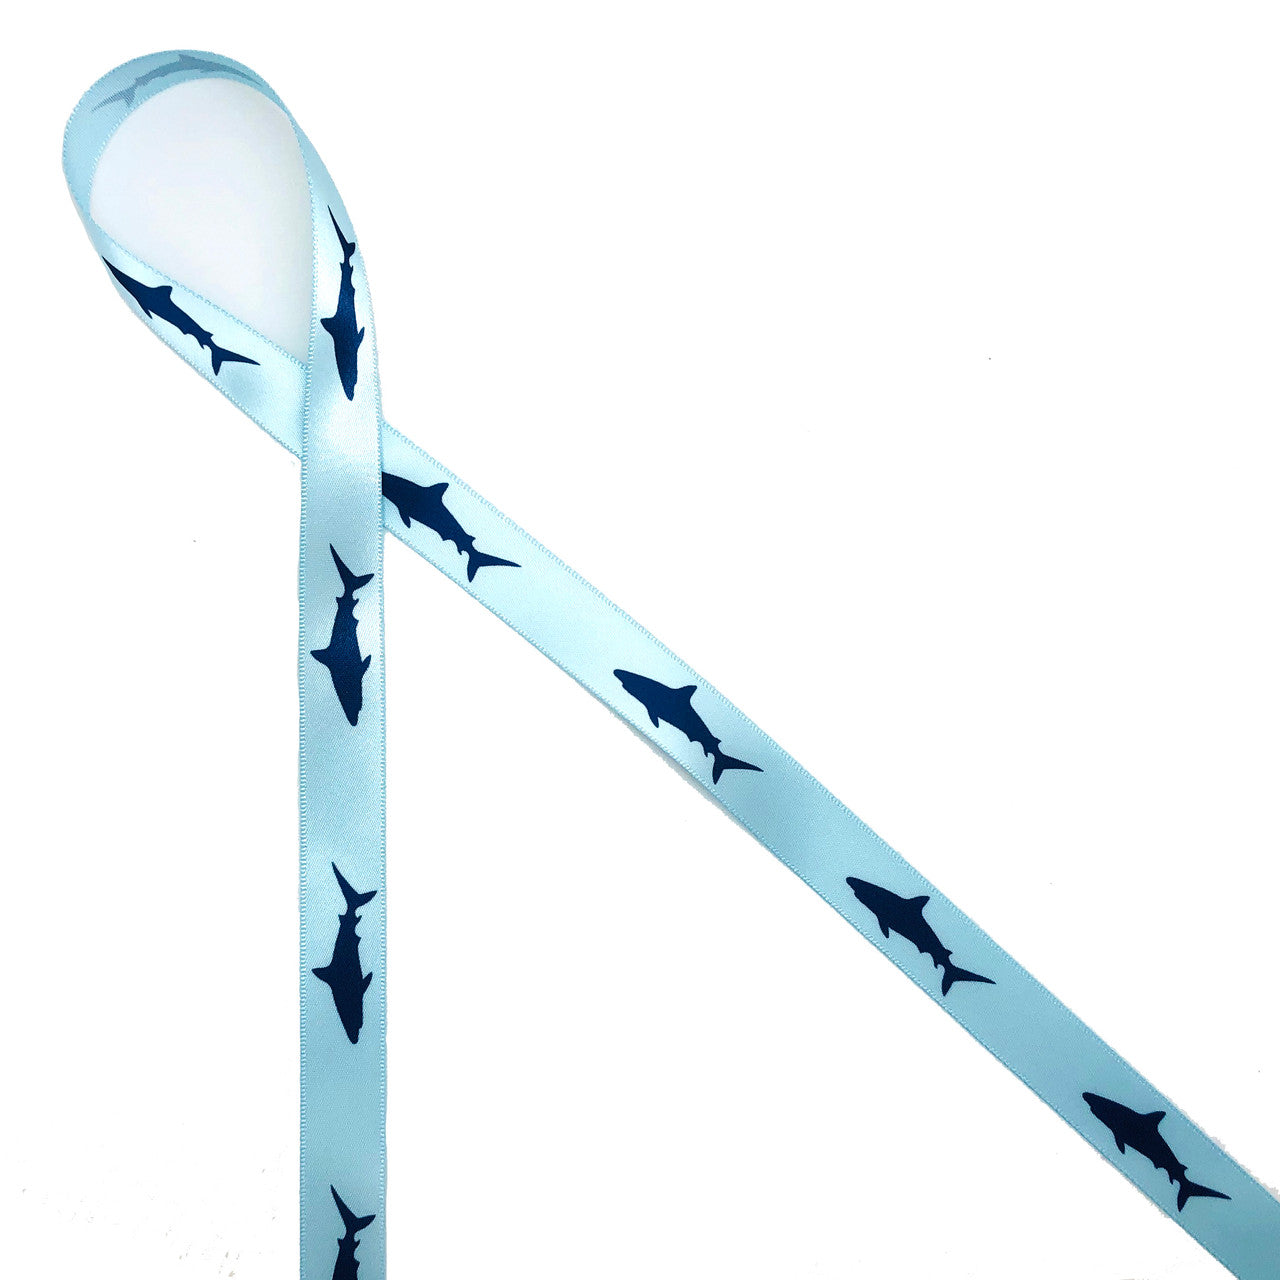 Navy blue shark silhouettes printed on 5/8" light blue ribbon is such a fun design for birthday parties, Shark Week and lots of Summer themed events! Our ribbon is designed and printed in the USA